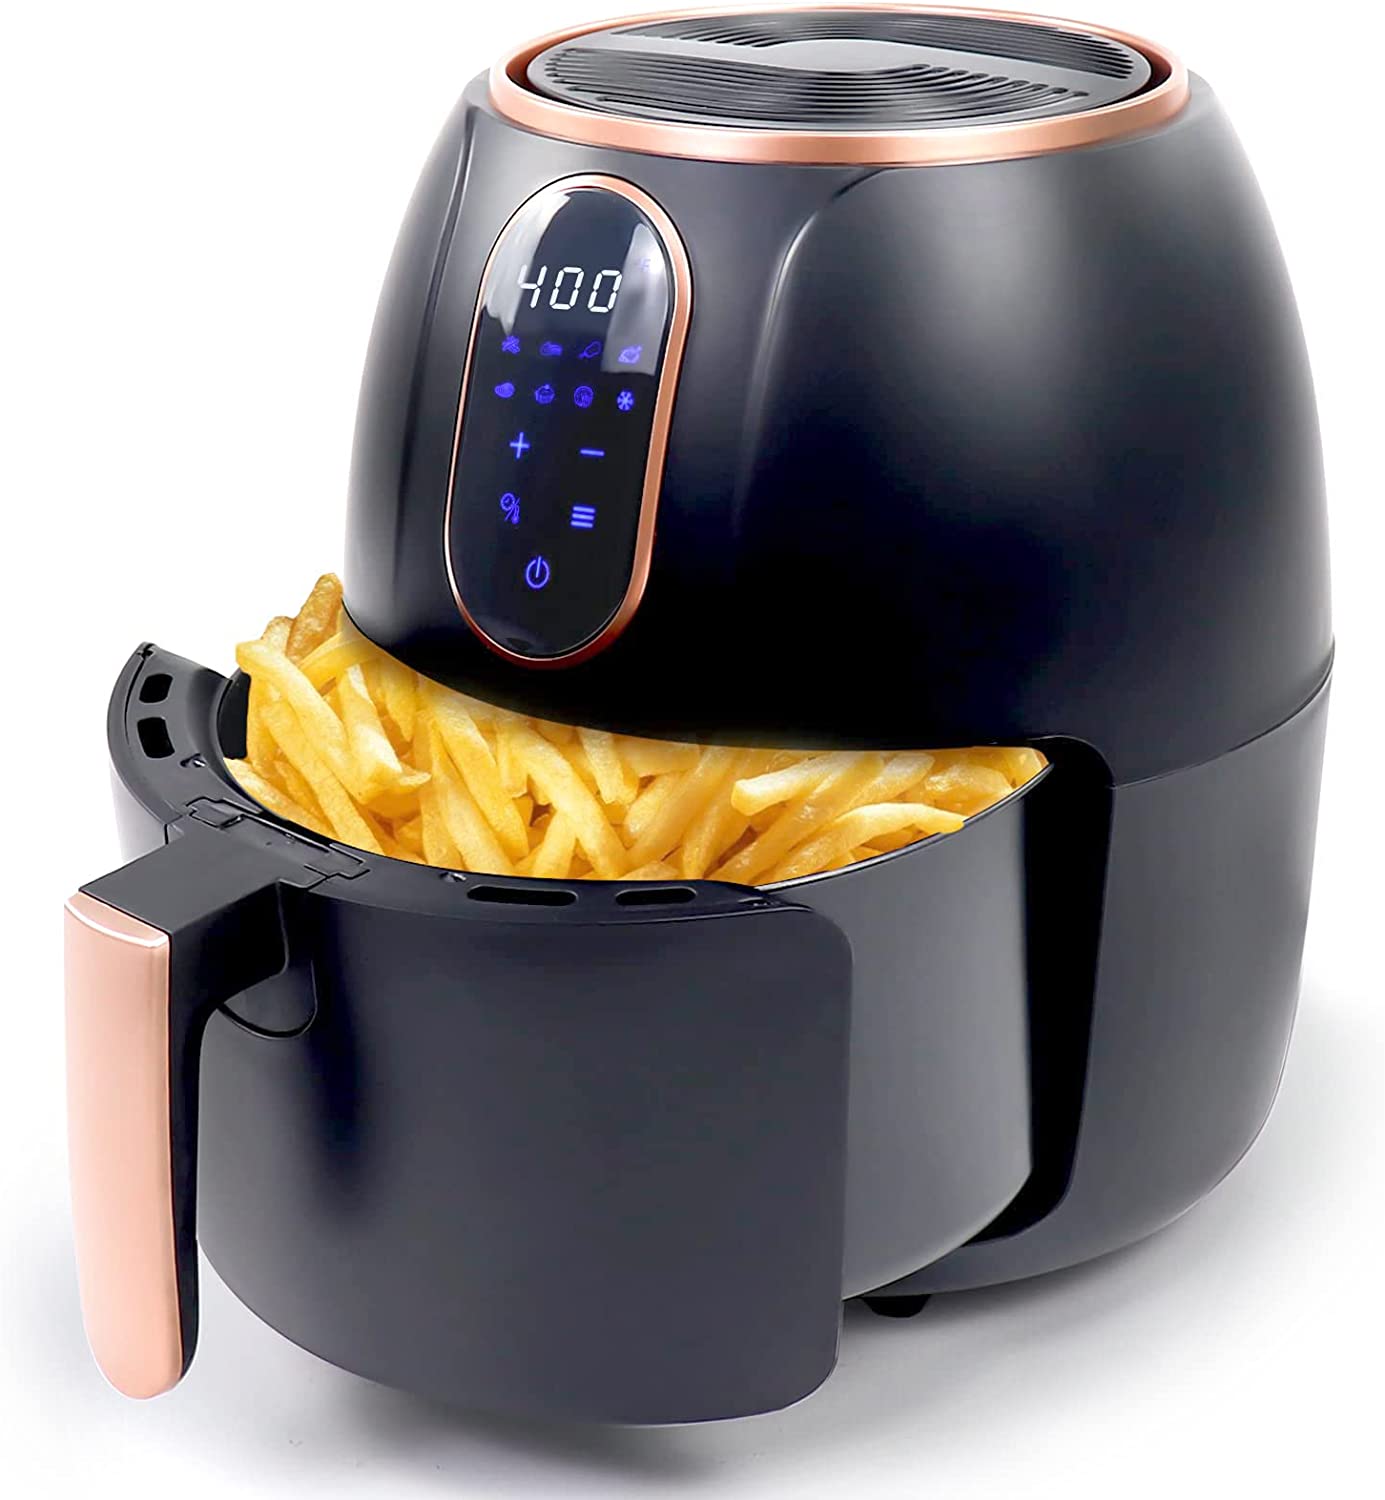 Which air fryer has the highest temperature